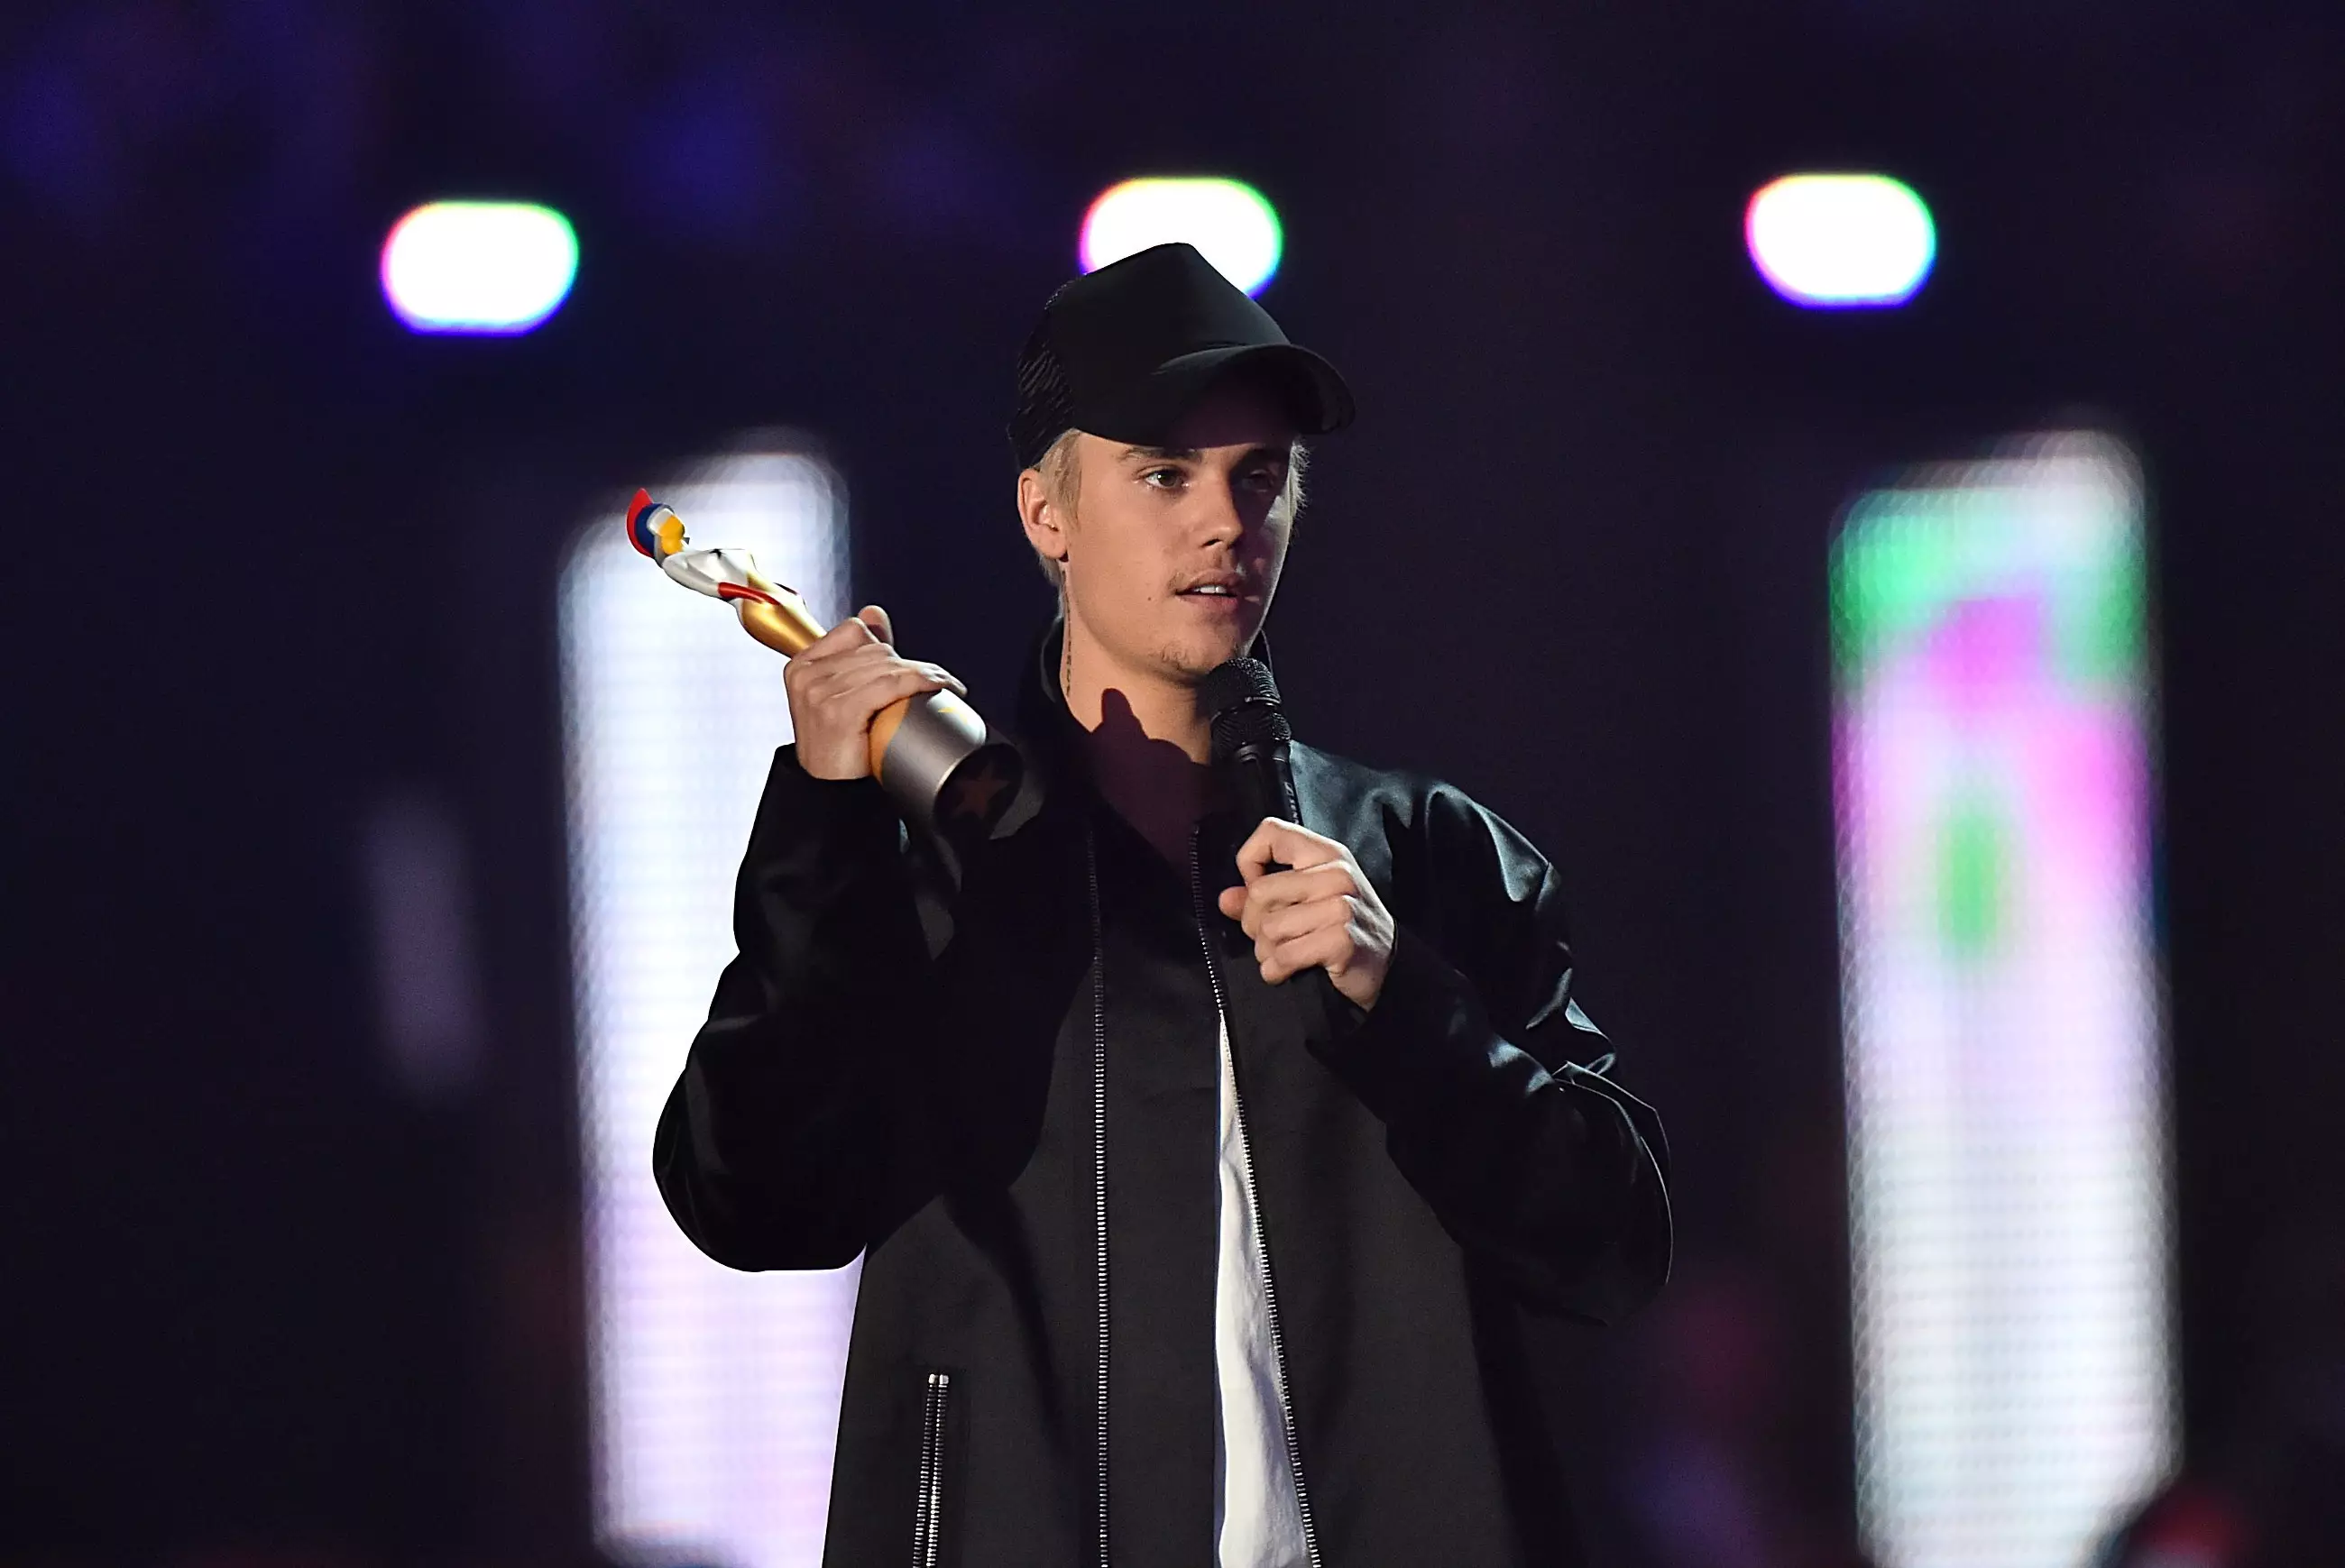 Justin Bieber has struggled with his mental health growing up in the spotlight